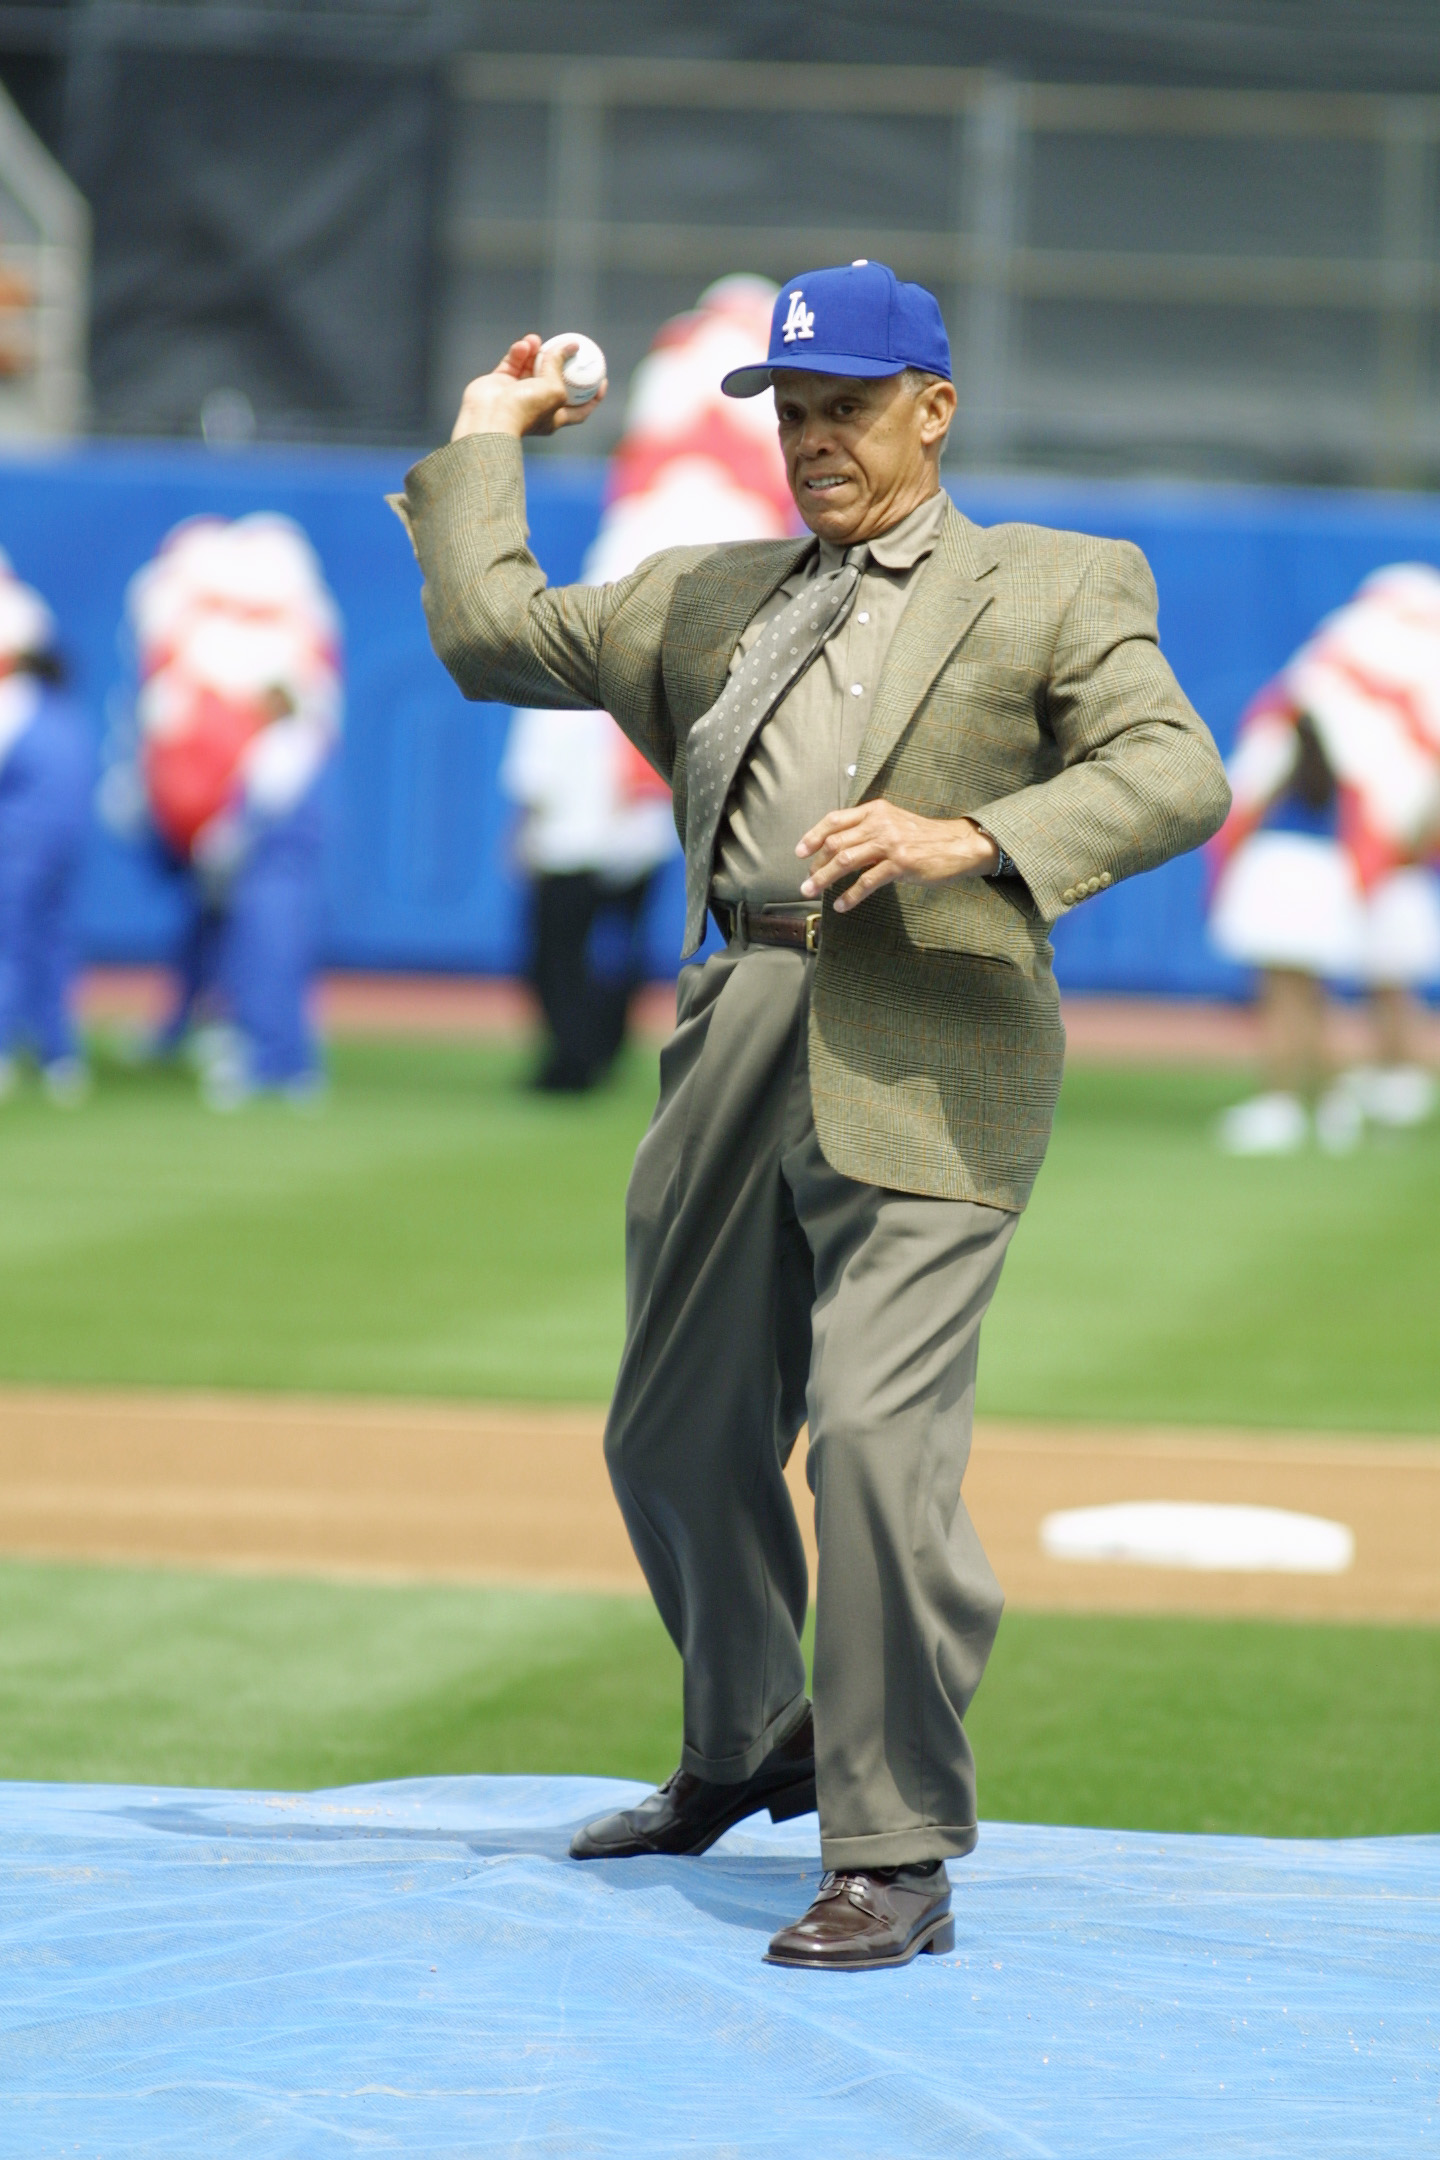 2 Apr 2001: Former Dodger player Maury Wills throws out the first pitch prior to the game against the Milwaukee Brewers at Dodger Stadium in Los Angeles, California. The Dodgers won the game 1-0. DIGITAL IMAGE. Mandatory Credit: Scott Halleran/ALLSPORT